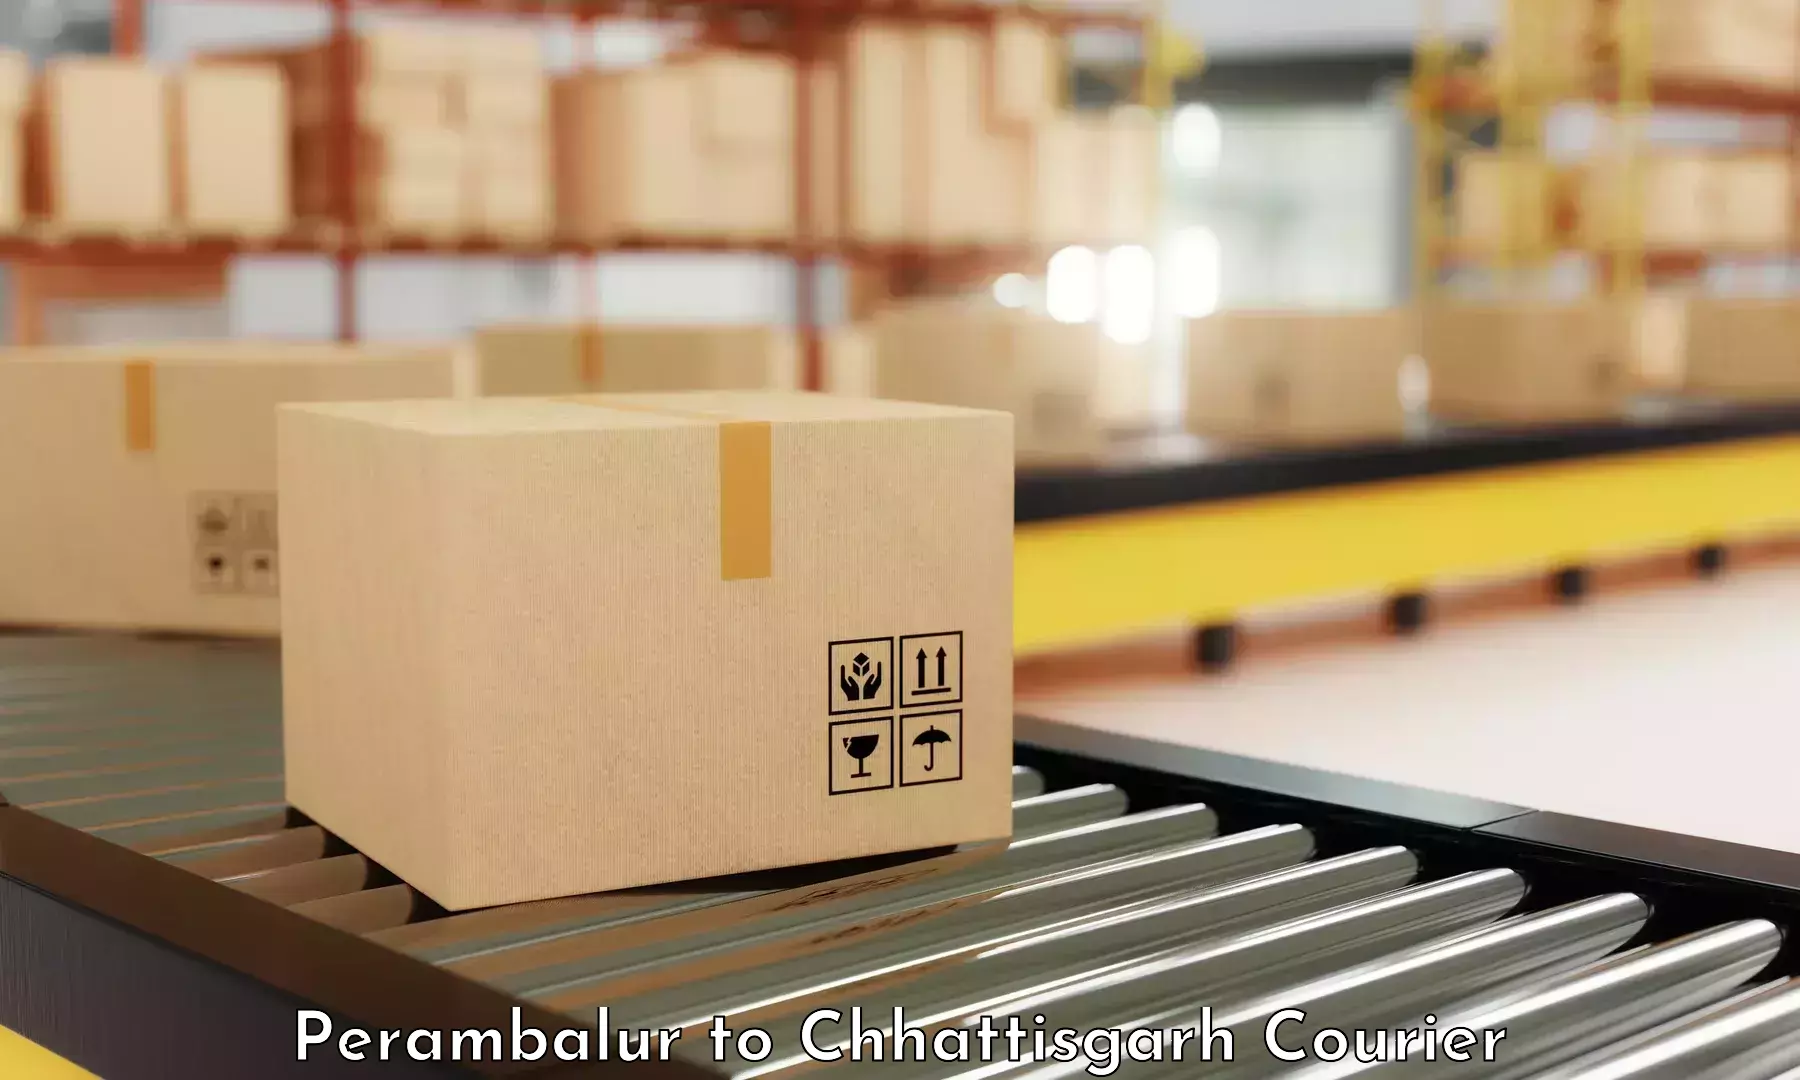 State-of-the-art courier technology Perambalur to Mahasamund